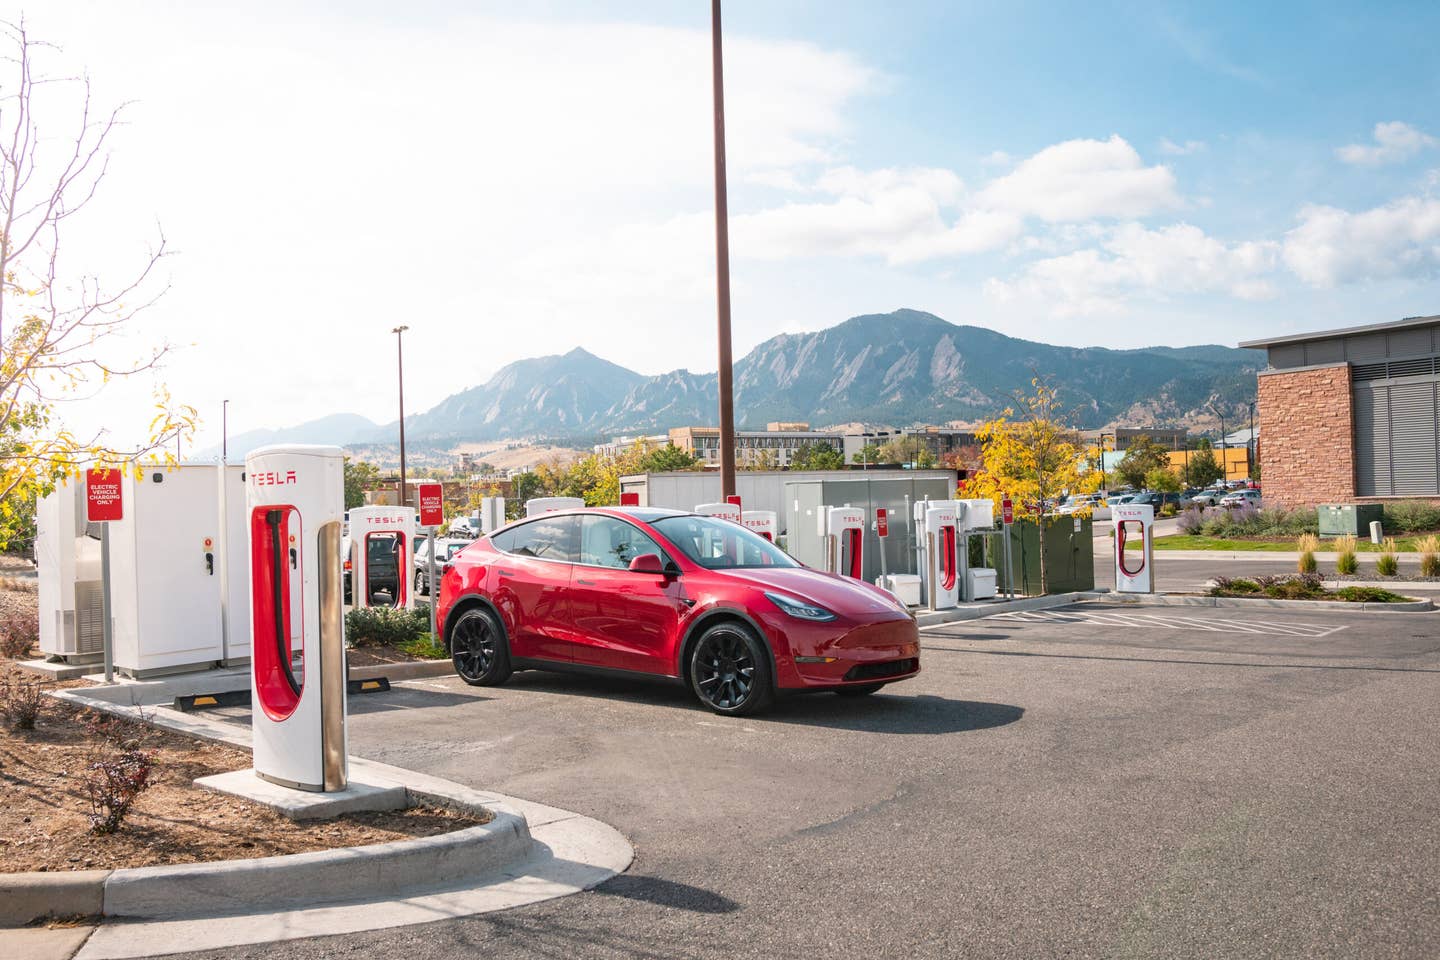 A Tesla charges at a public Supercharger location.